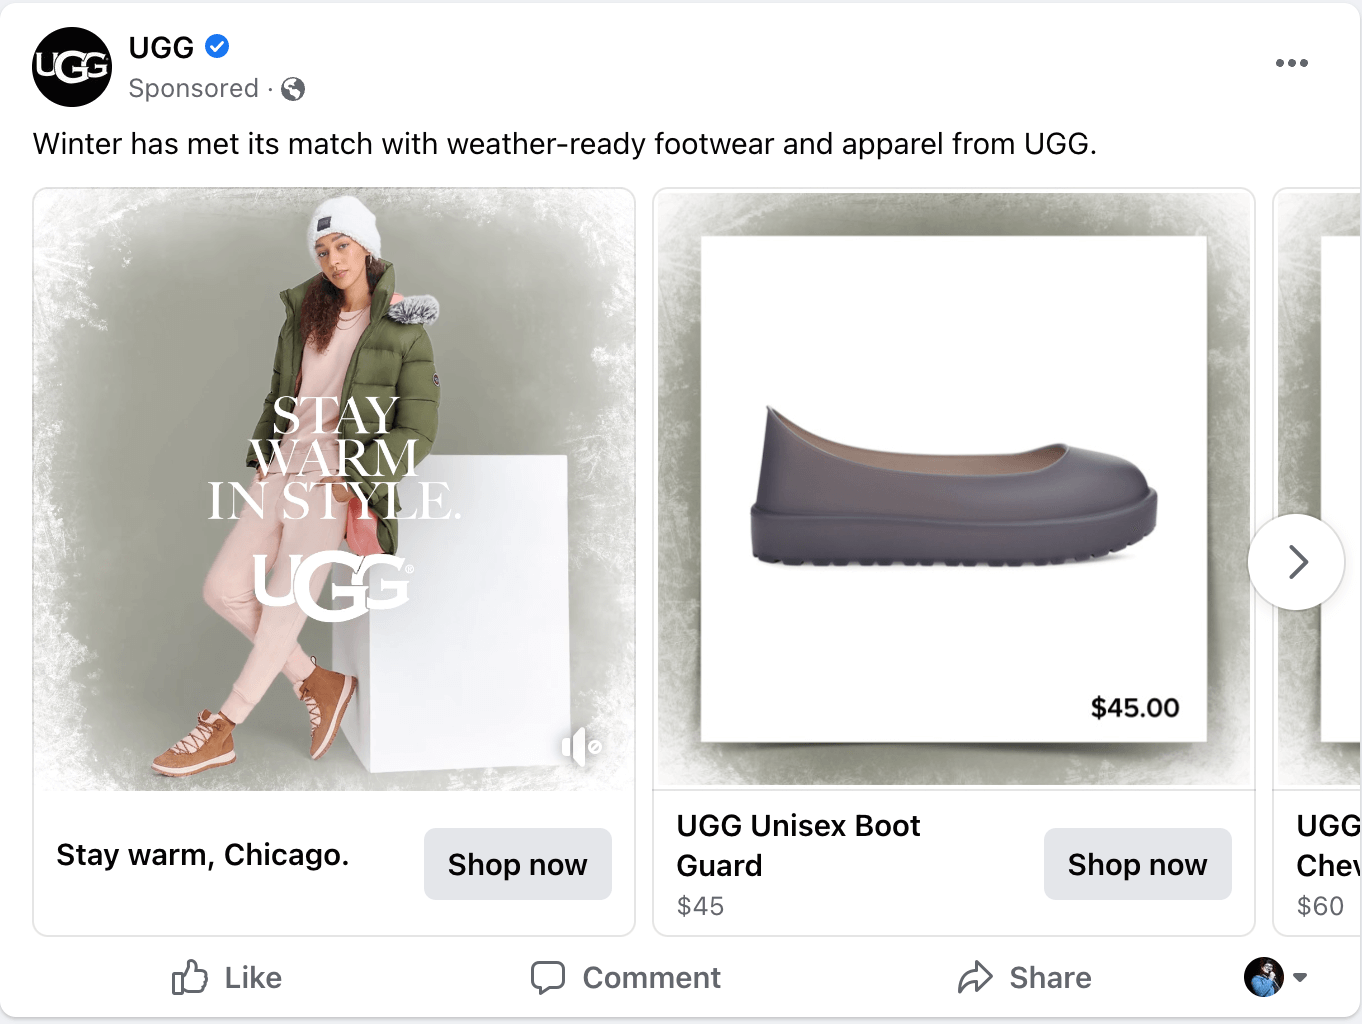 A Facebook carousel ad for Uggs